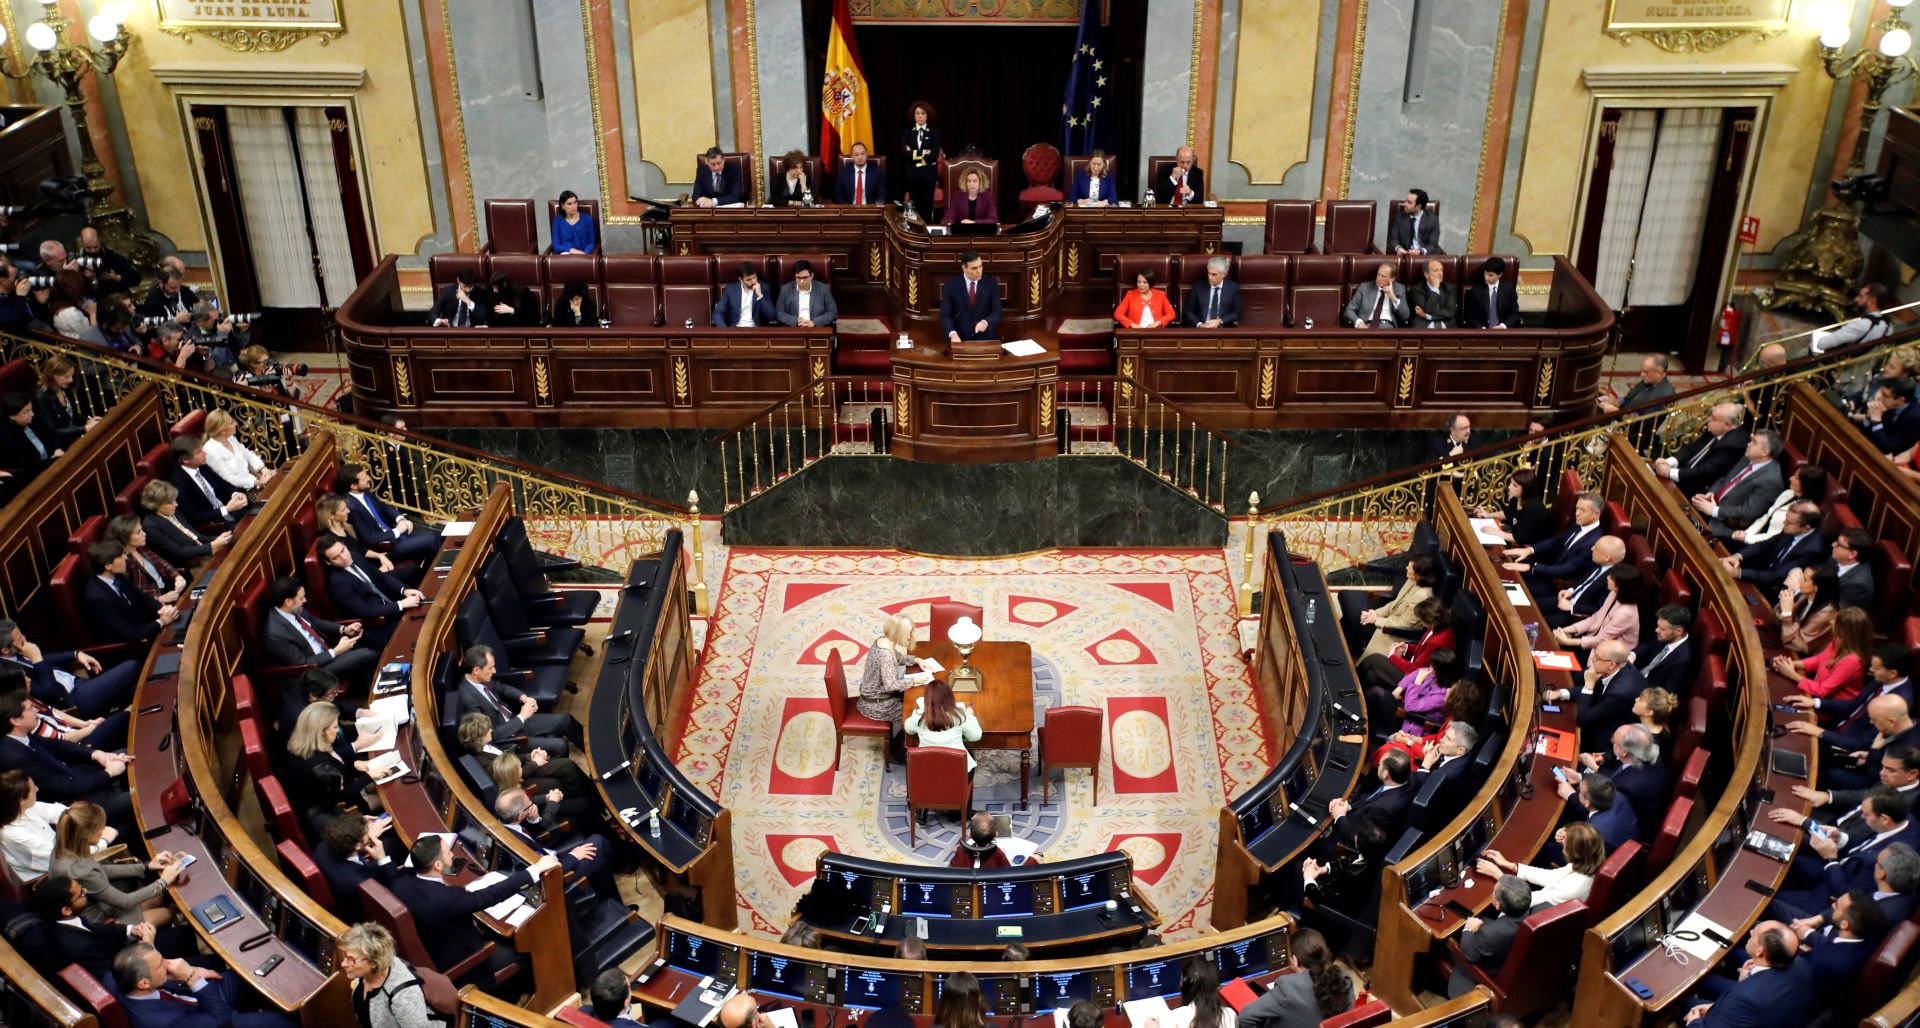 epa08109956 Spanish acting Prime Minister Pedro Sanchez delivers his speech at the start of the second investiture voting at the Lower House in Madrid, Spain, 07 January 2020. The Spanish Parliament holds the second investiture voting at Parliament in which acting Prime Minister Pedro Sanchez is expected to win by a tight majority.  EPA/Juan Carlos Hidalgo / POOL